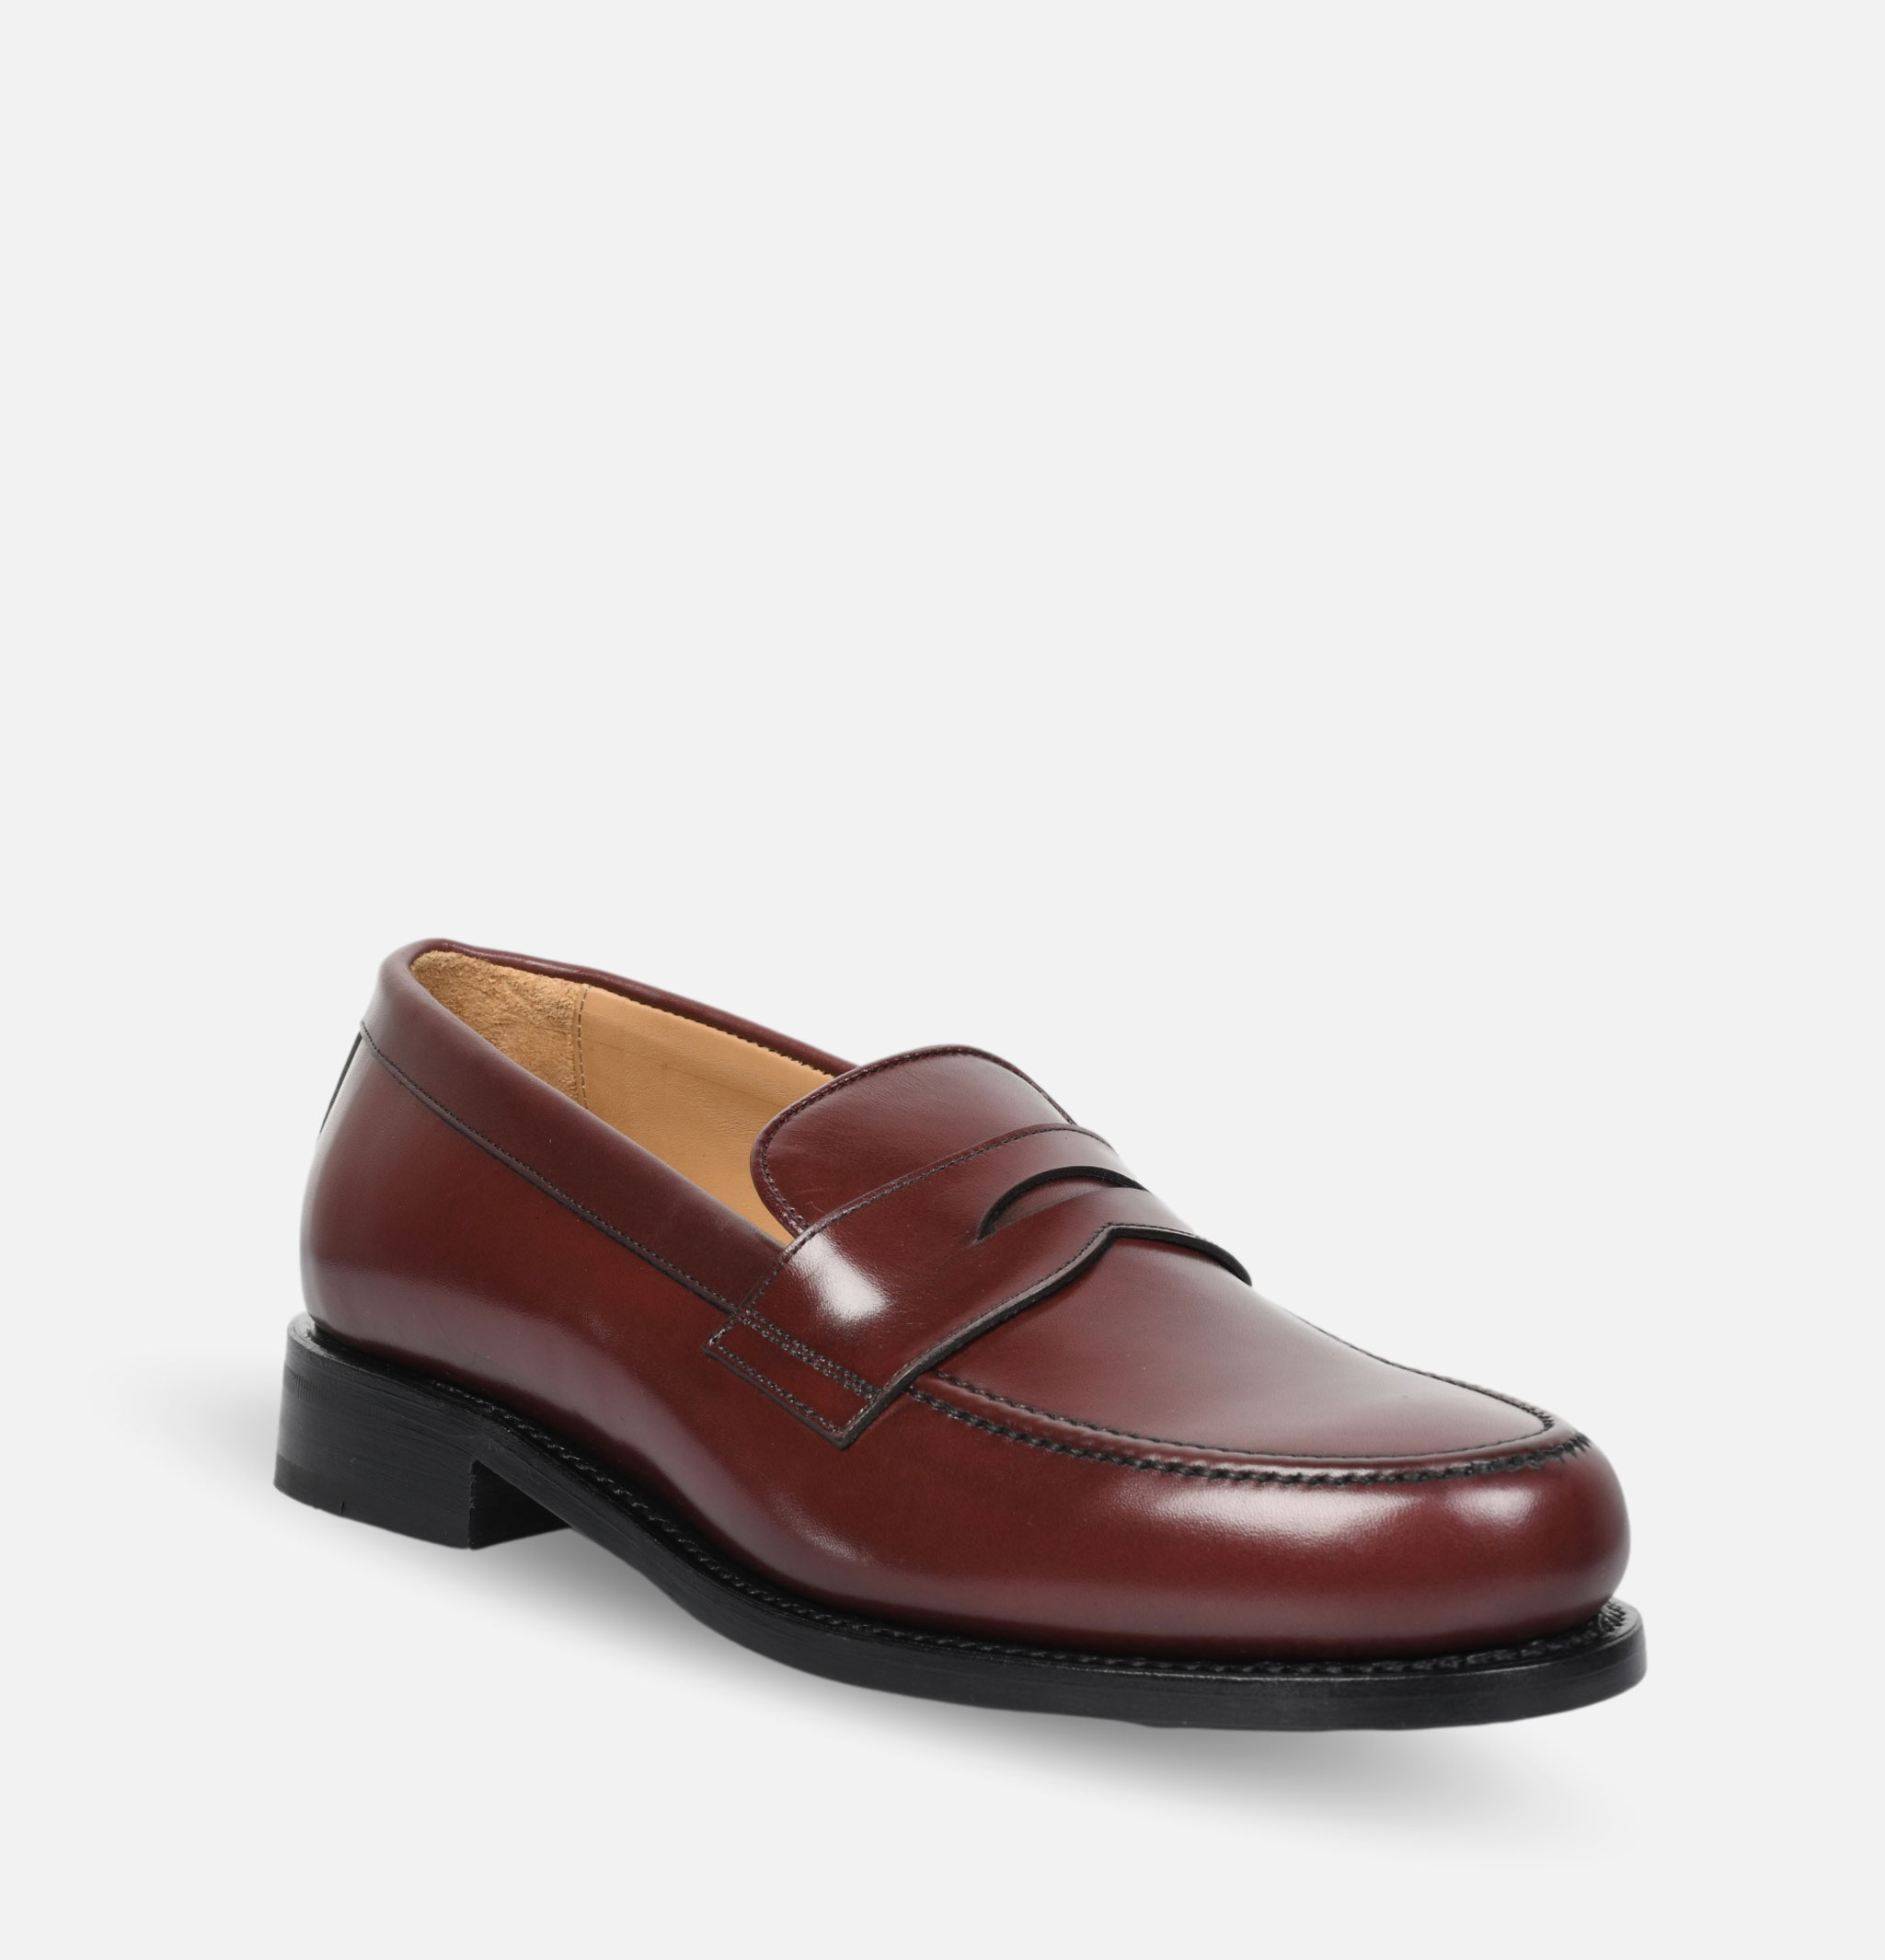 moccassins to&co dexter burgundy